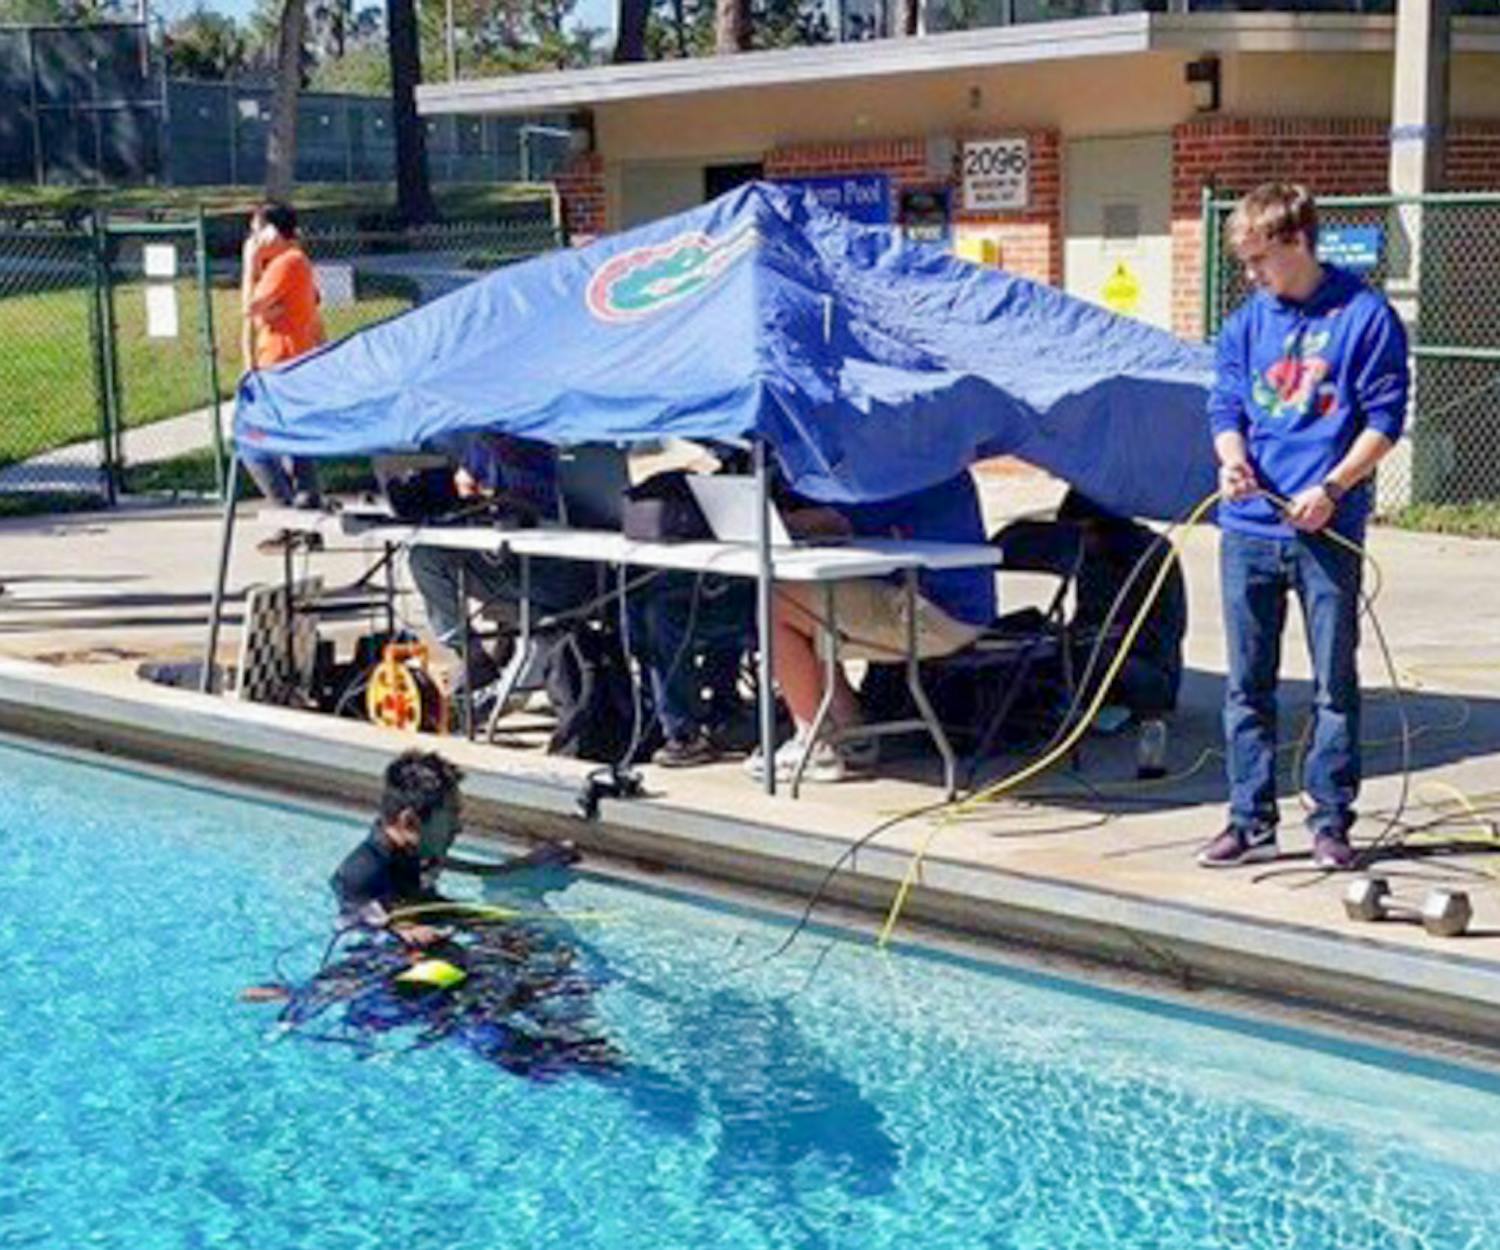 Members of Project GATOR test their “subjugator” underwater robot in a pool by Graham Hall. The group received a $6,000 grant from the U.S. Department of State to help build the machine, which searches for abandoned crab fishing traps.